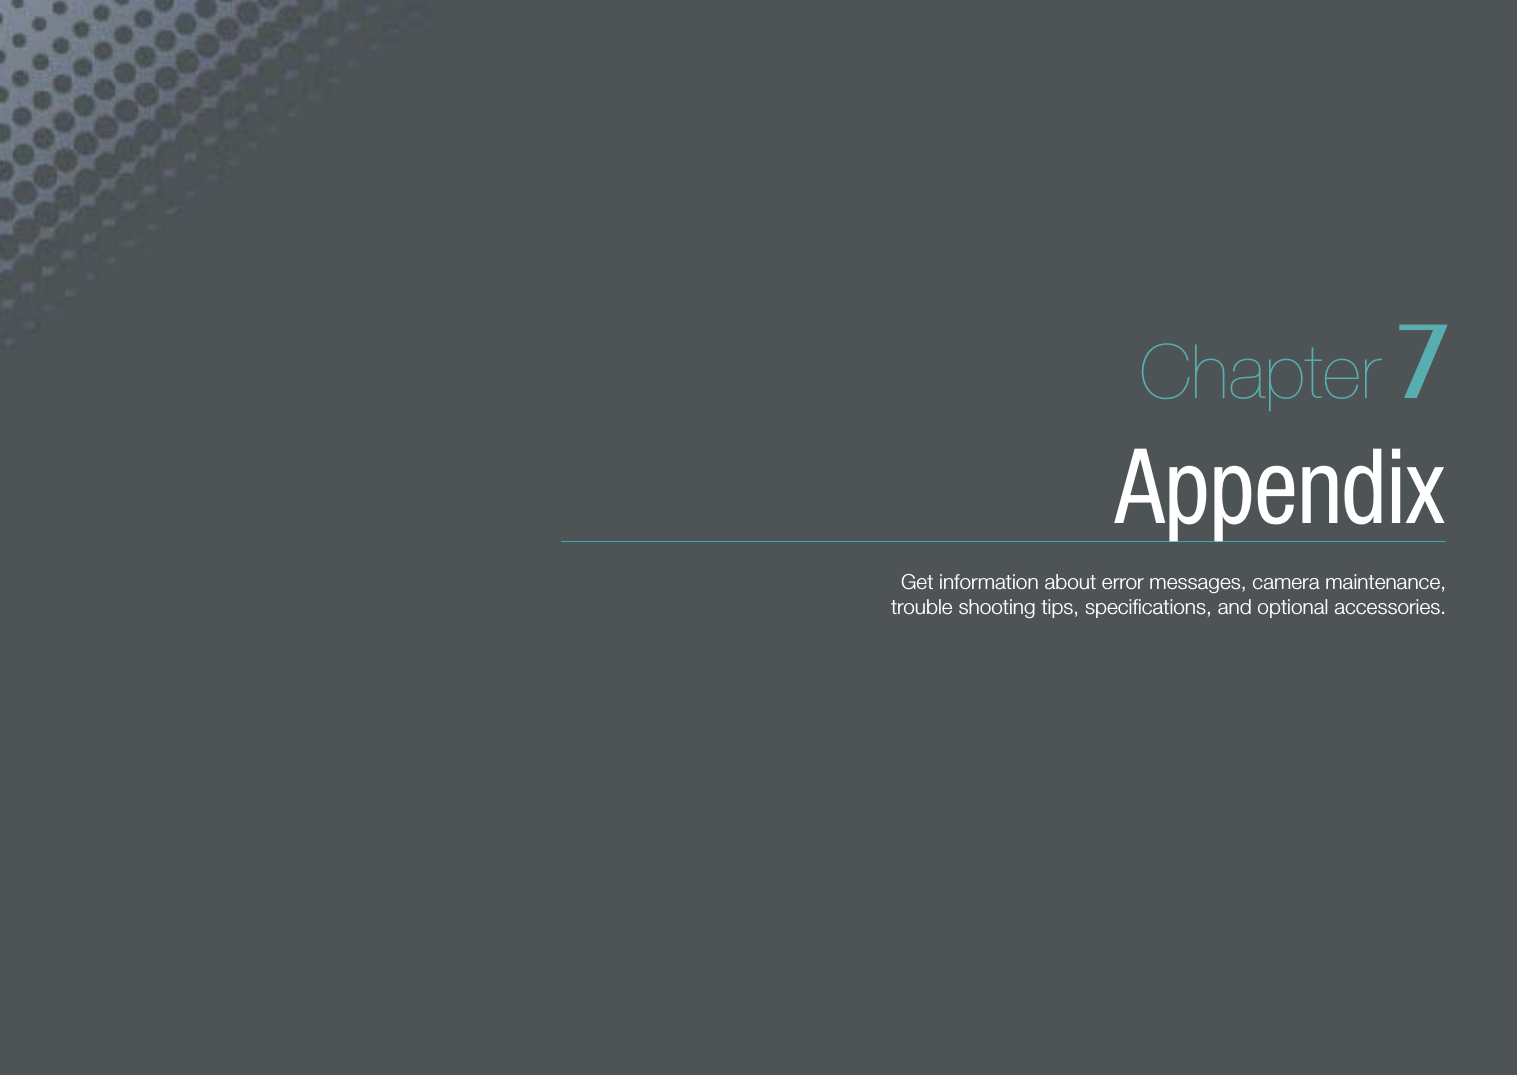 Chapter 7AppendixGet information about error messages, camera maintenance,  trouble shooting tips, speciﬁcations, and optional accessories. 